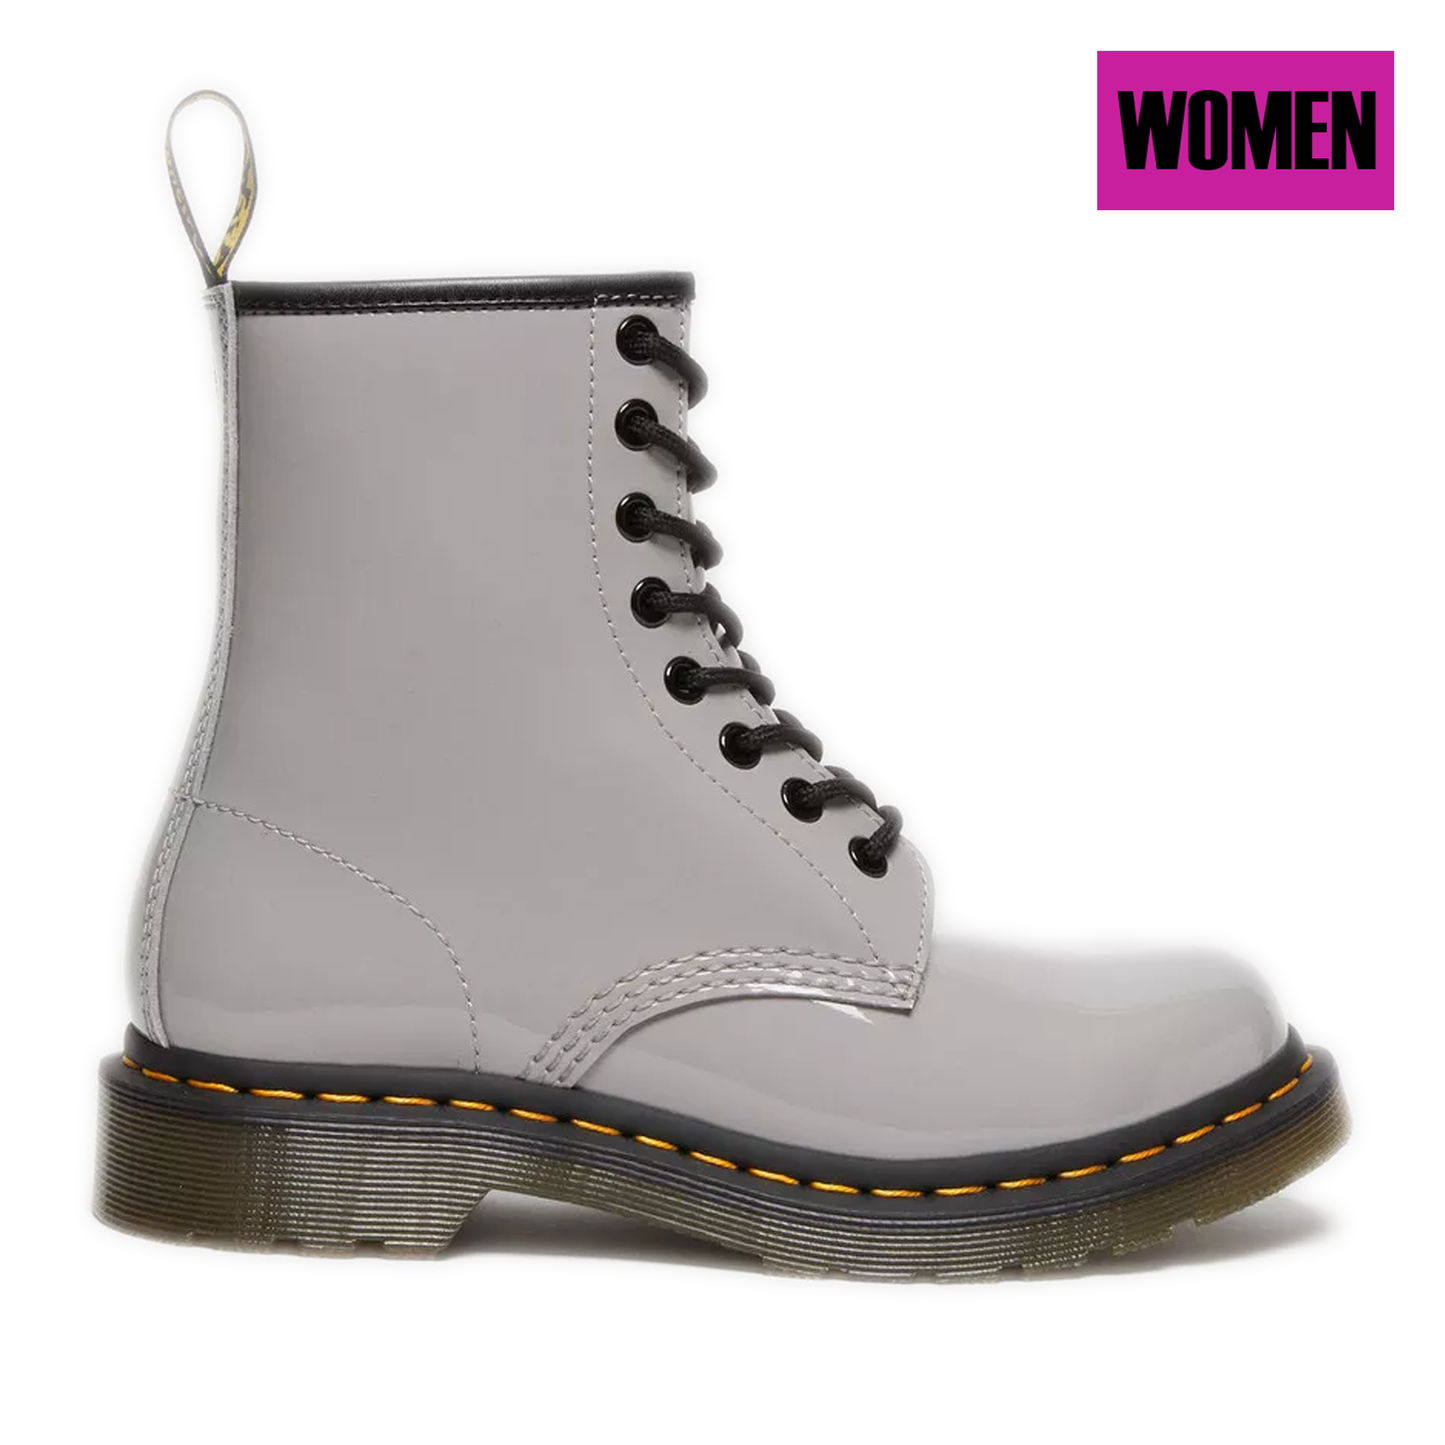 Women's Dr. Martens 1460 Patent Leather Lace Up Boots - Grey Lucido/ Patent Lamper